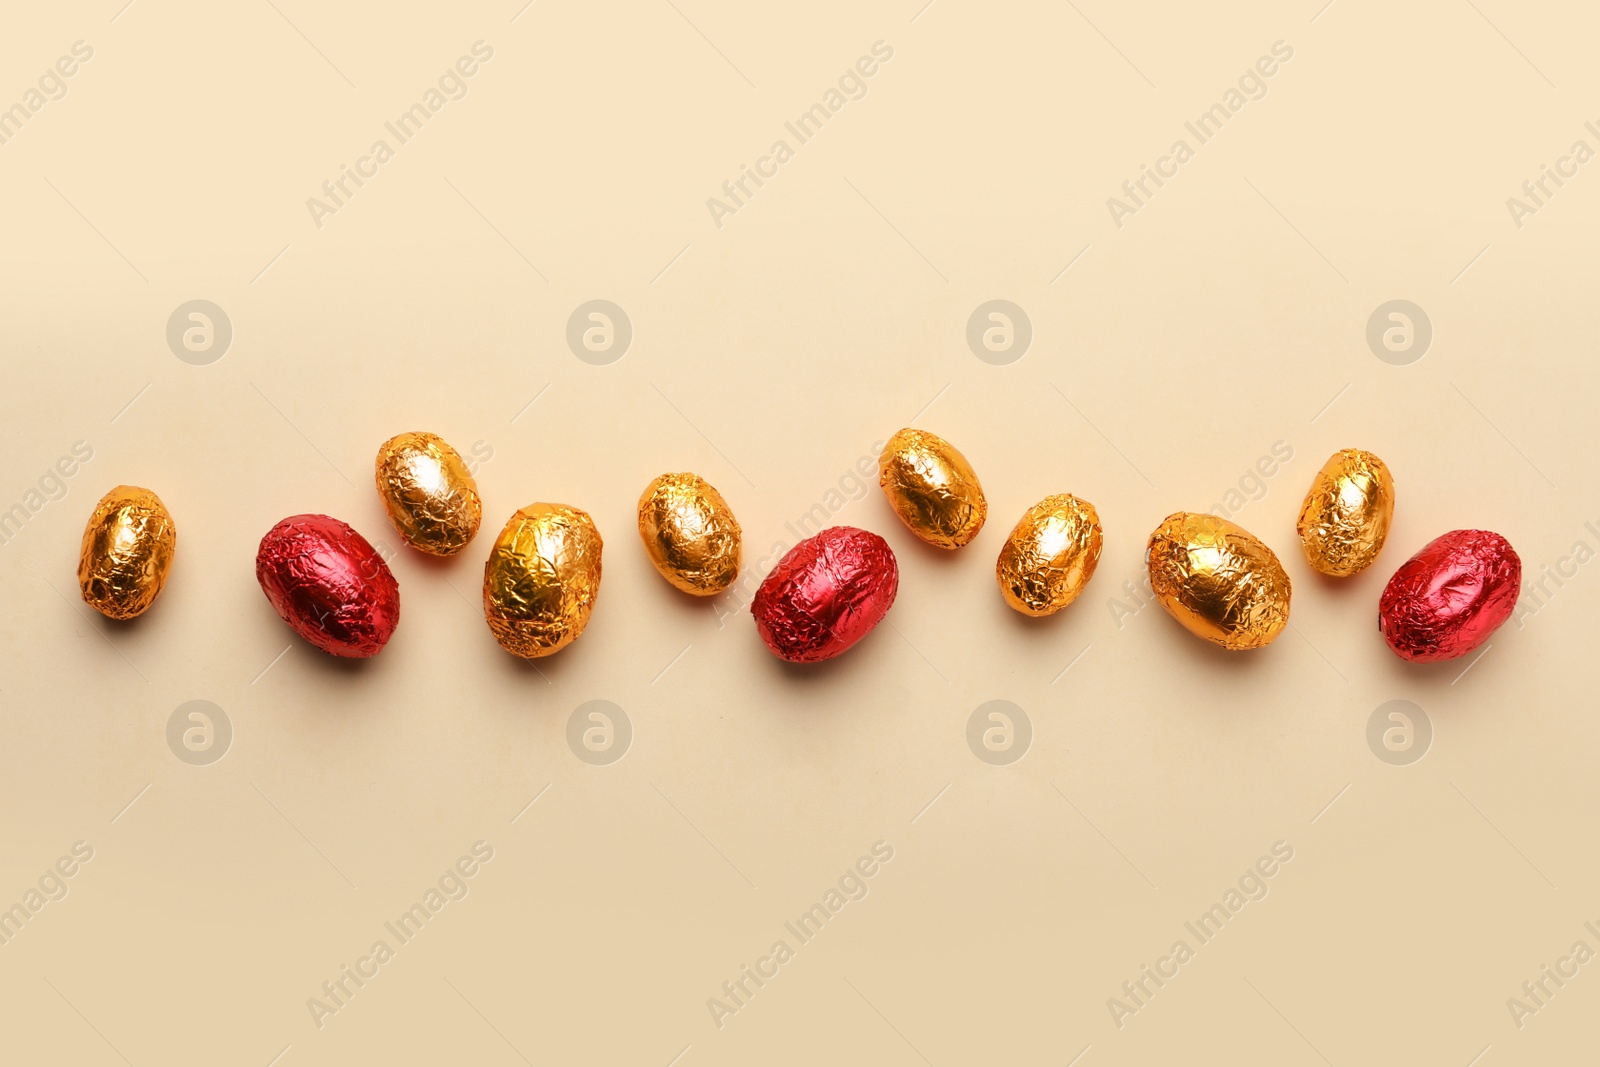 Photo of Chocolate eggs wrapped in red and golden foil on beige background, flat lay